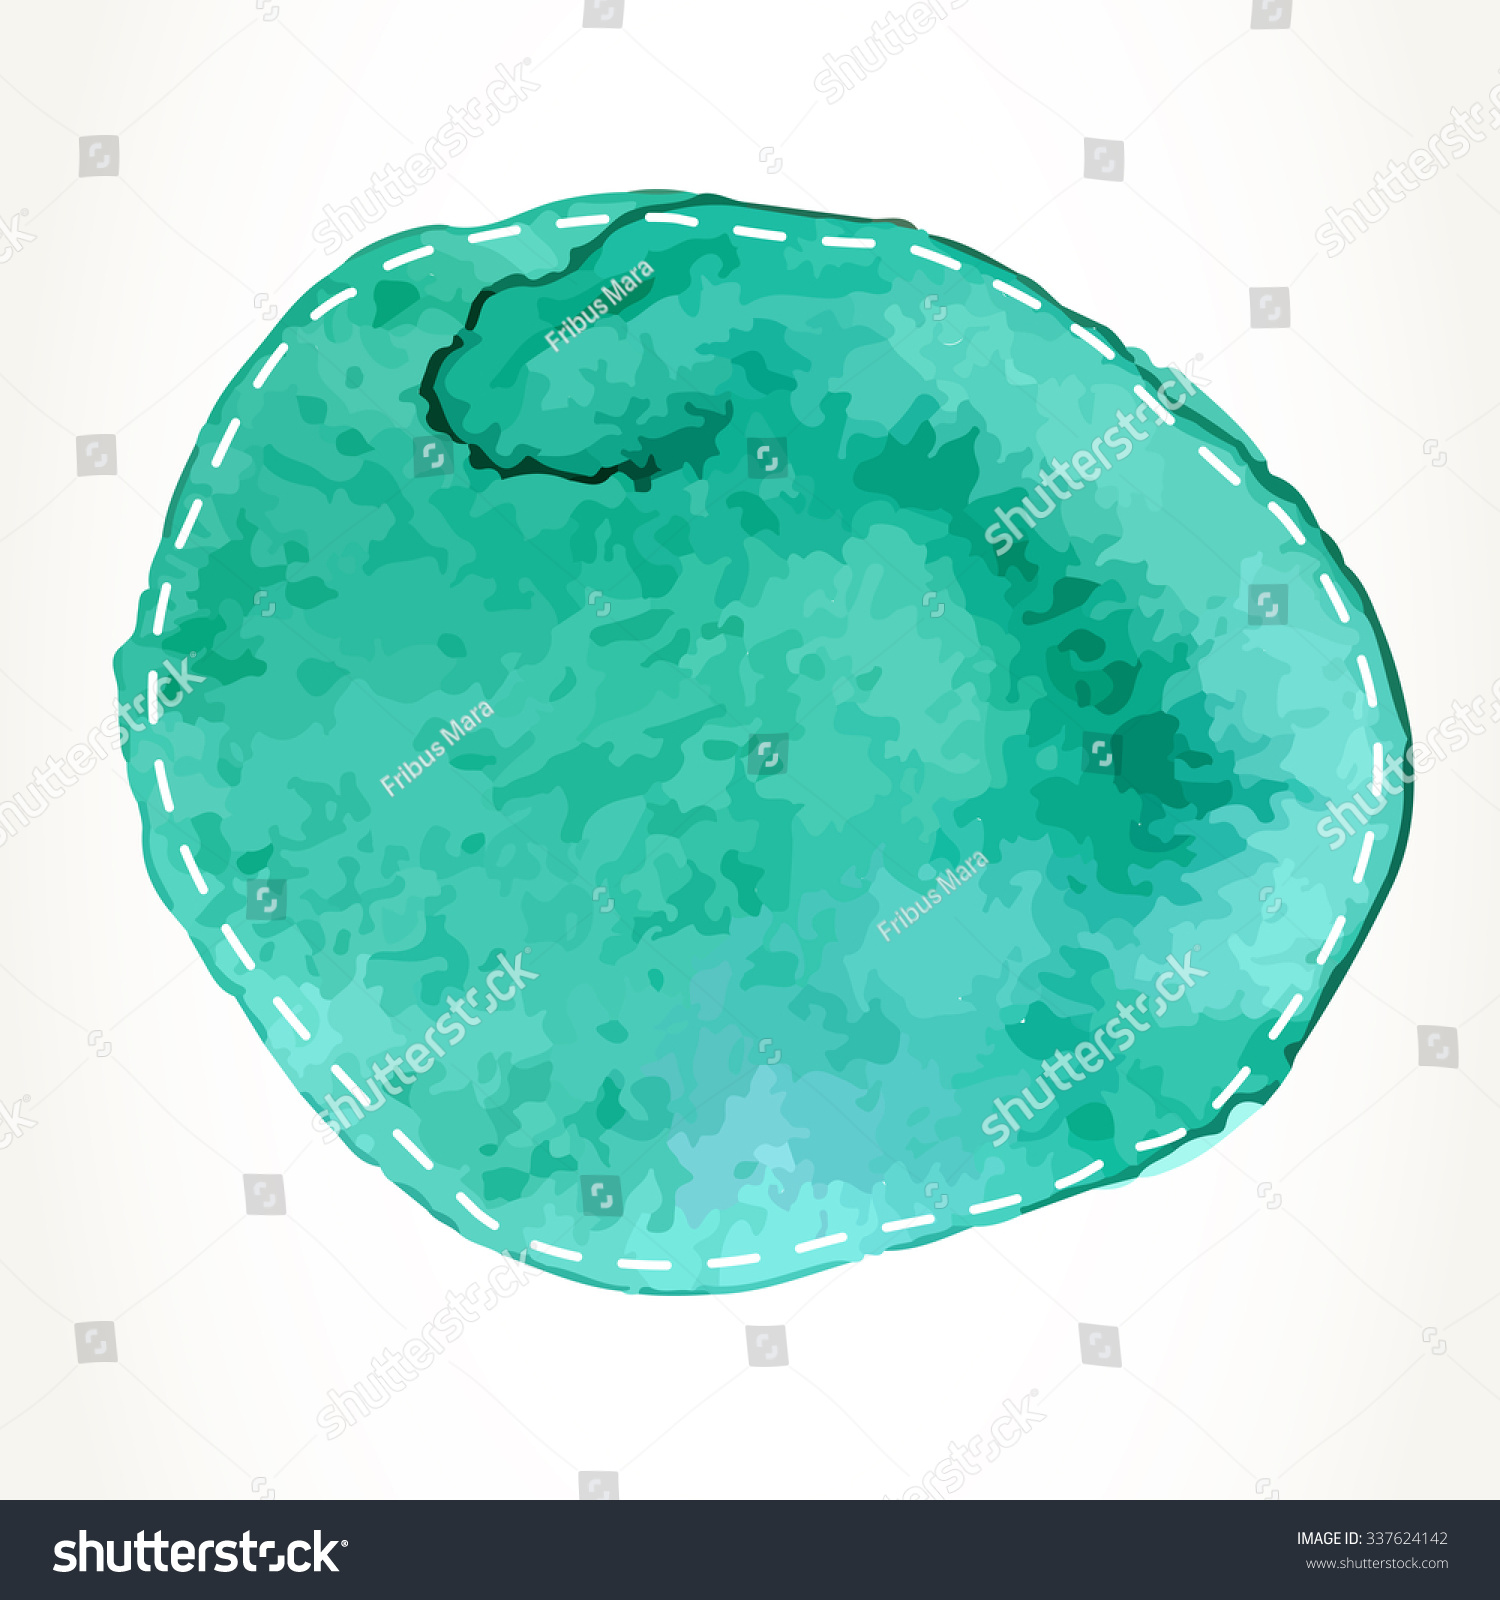 Hand drawn green watercolor circle with dash outline, isolated over white. #337624142